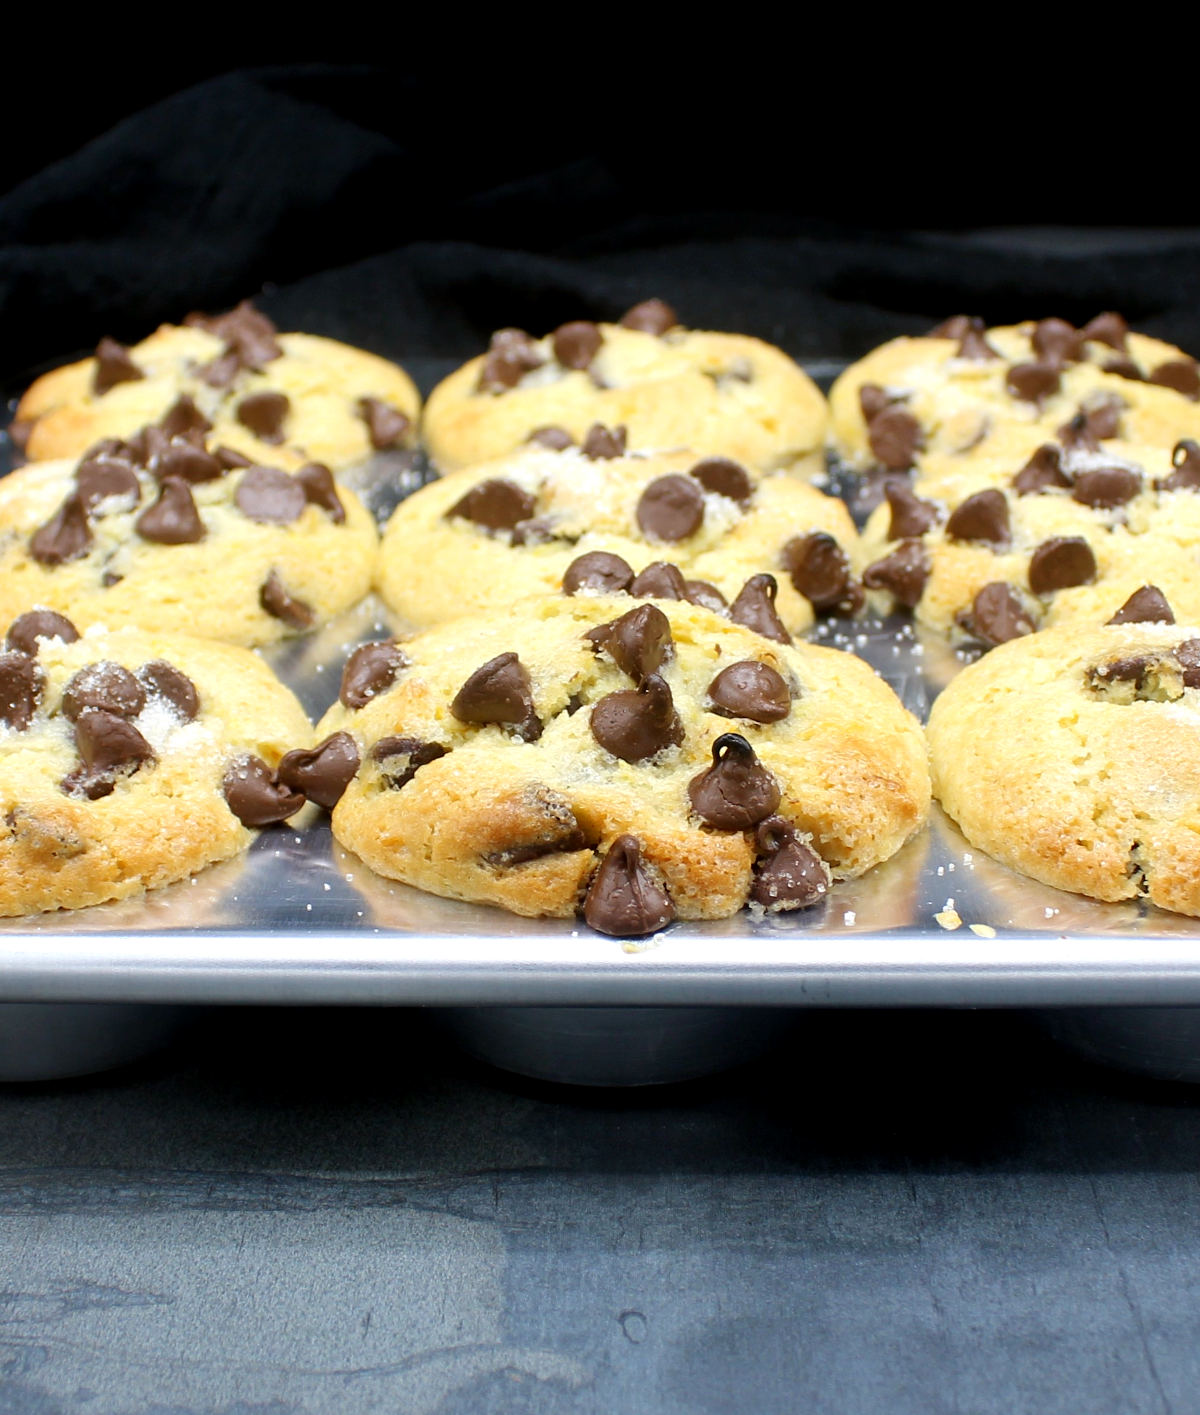 Front closeup of a muffin pan with baked chocolate chip muffins.